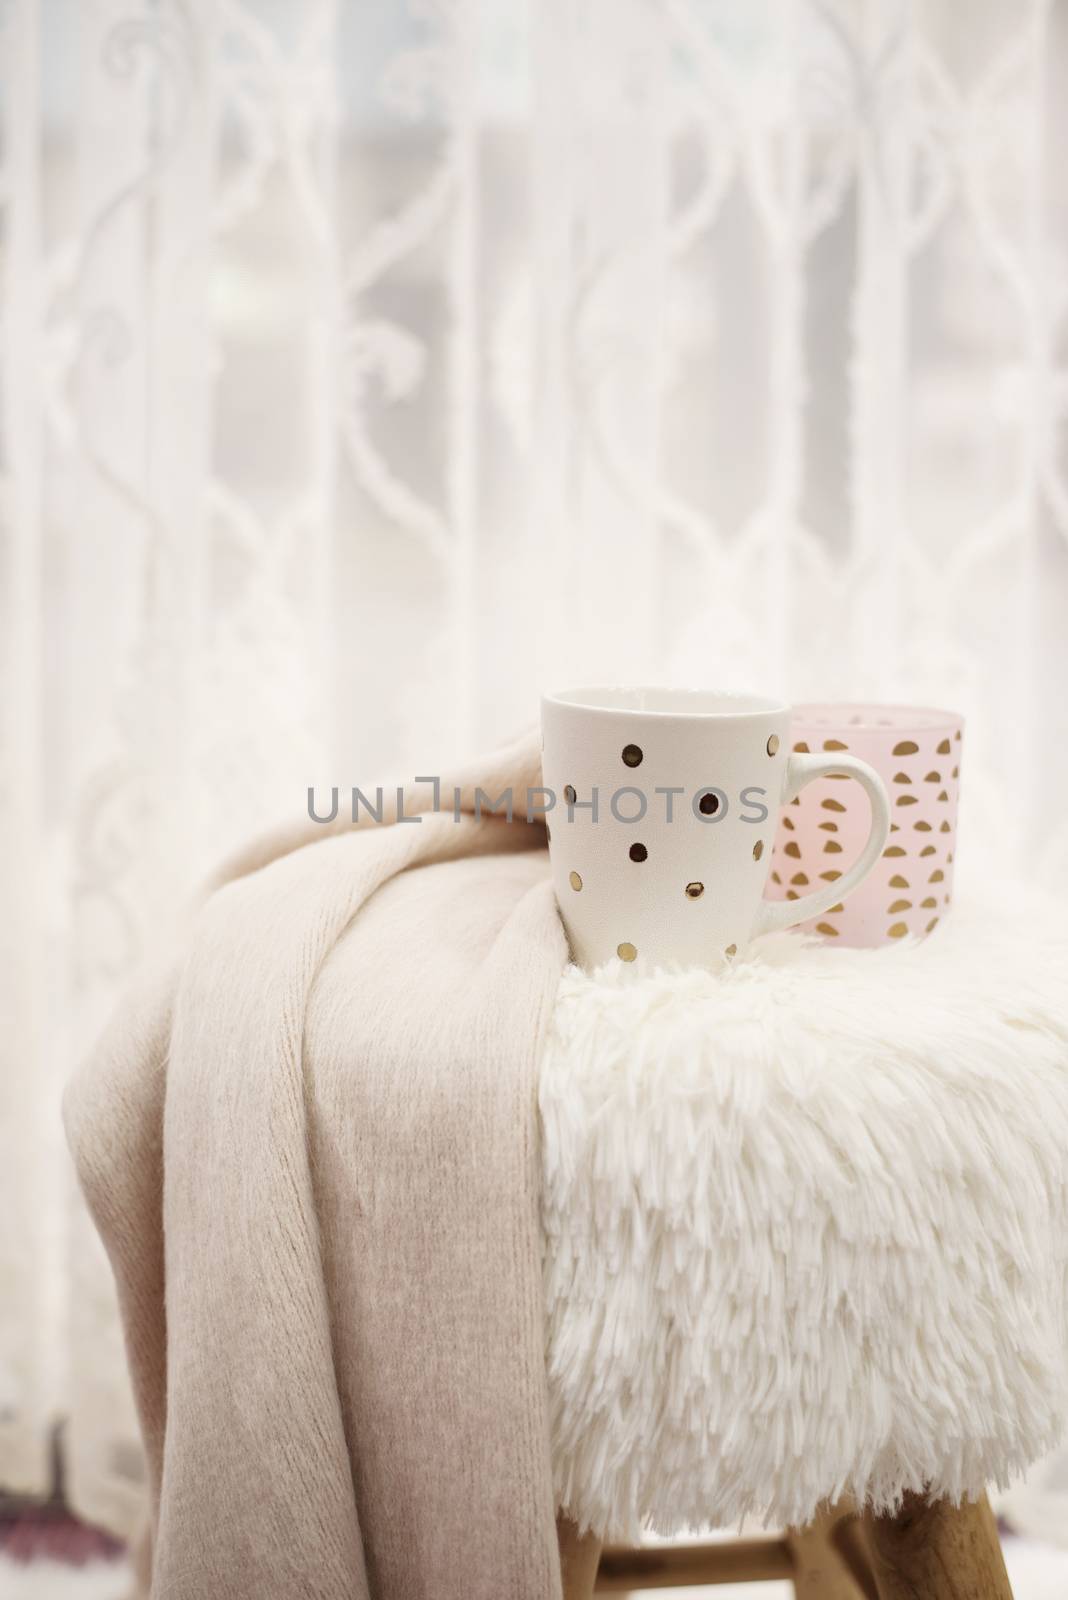 Hot chocolate, a cup of cappuccino on a fur chair in front of a large window with a white sheers curtain. Warm scarf and lights around. Cozy winter eveningsHot chocolate, a cup of cappuccino on a fur chair in front of a large window with a white sheers curtain. Warm scarf and lights around. Cozy winter evenings by sevda_stancheva